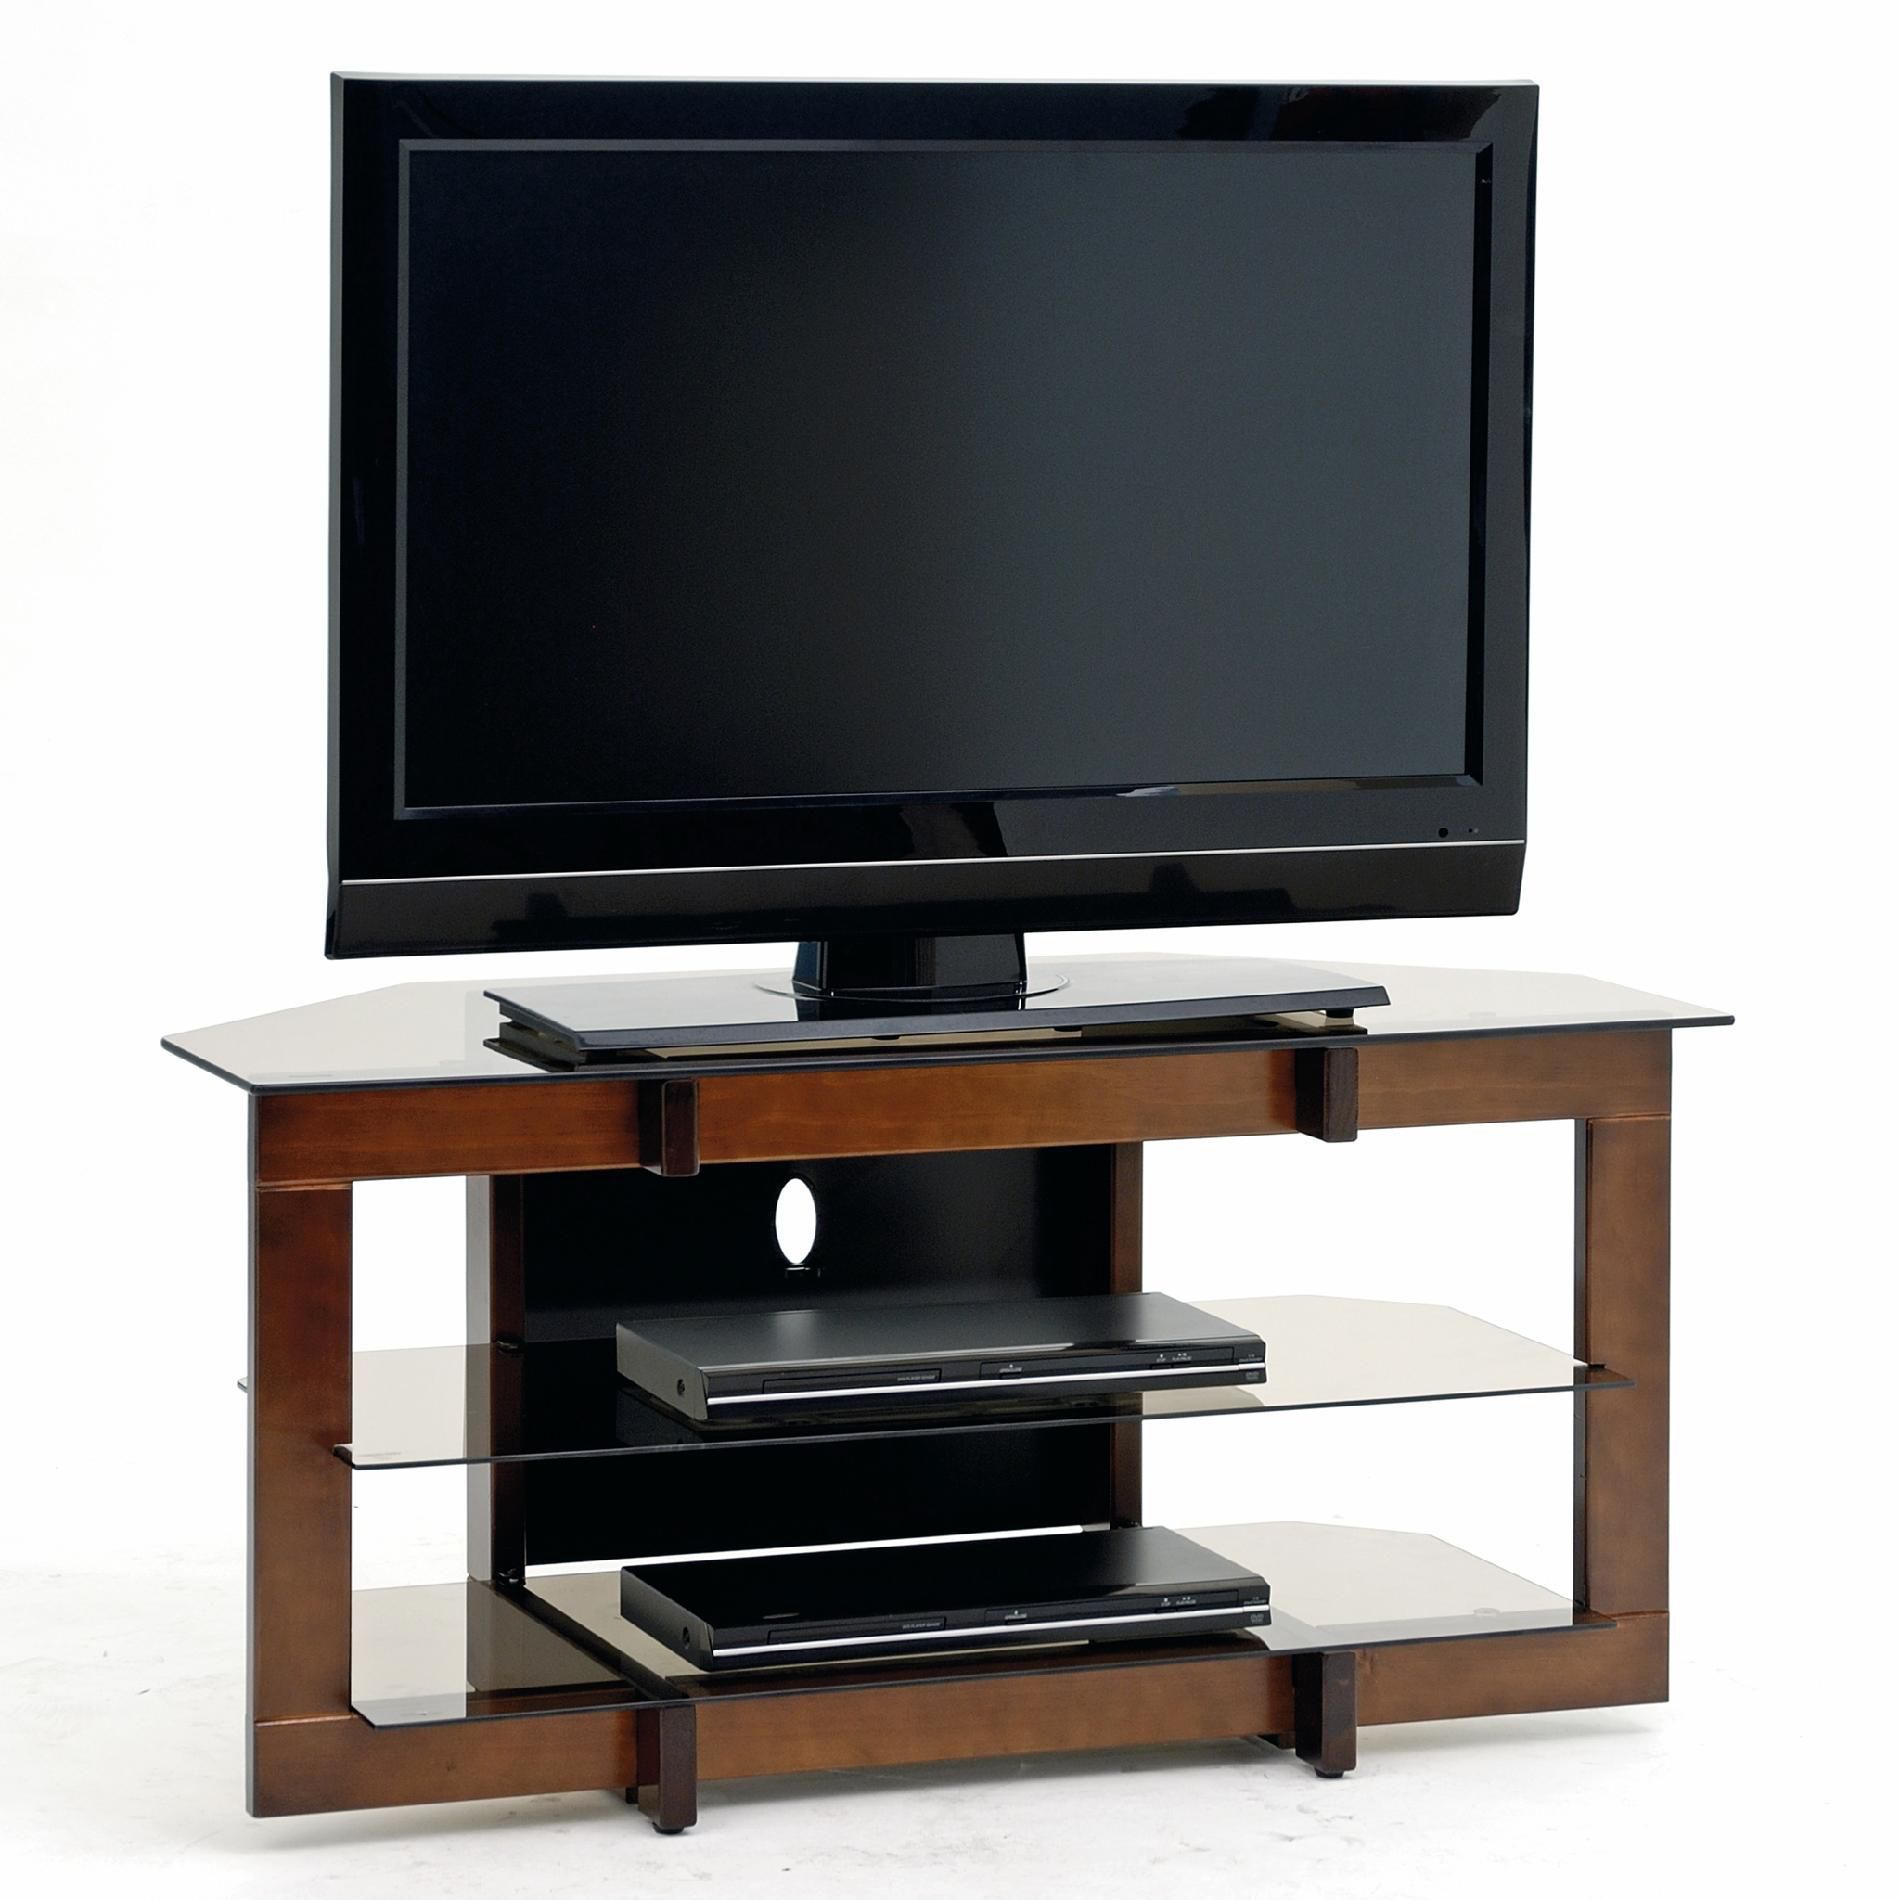 Featured Photo of 15 The Best Contemporary Black Tv Stands Corner Glass Shelf